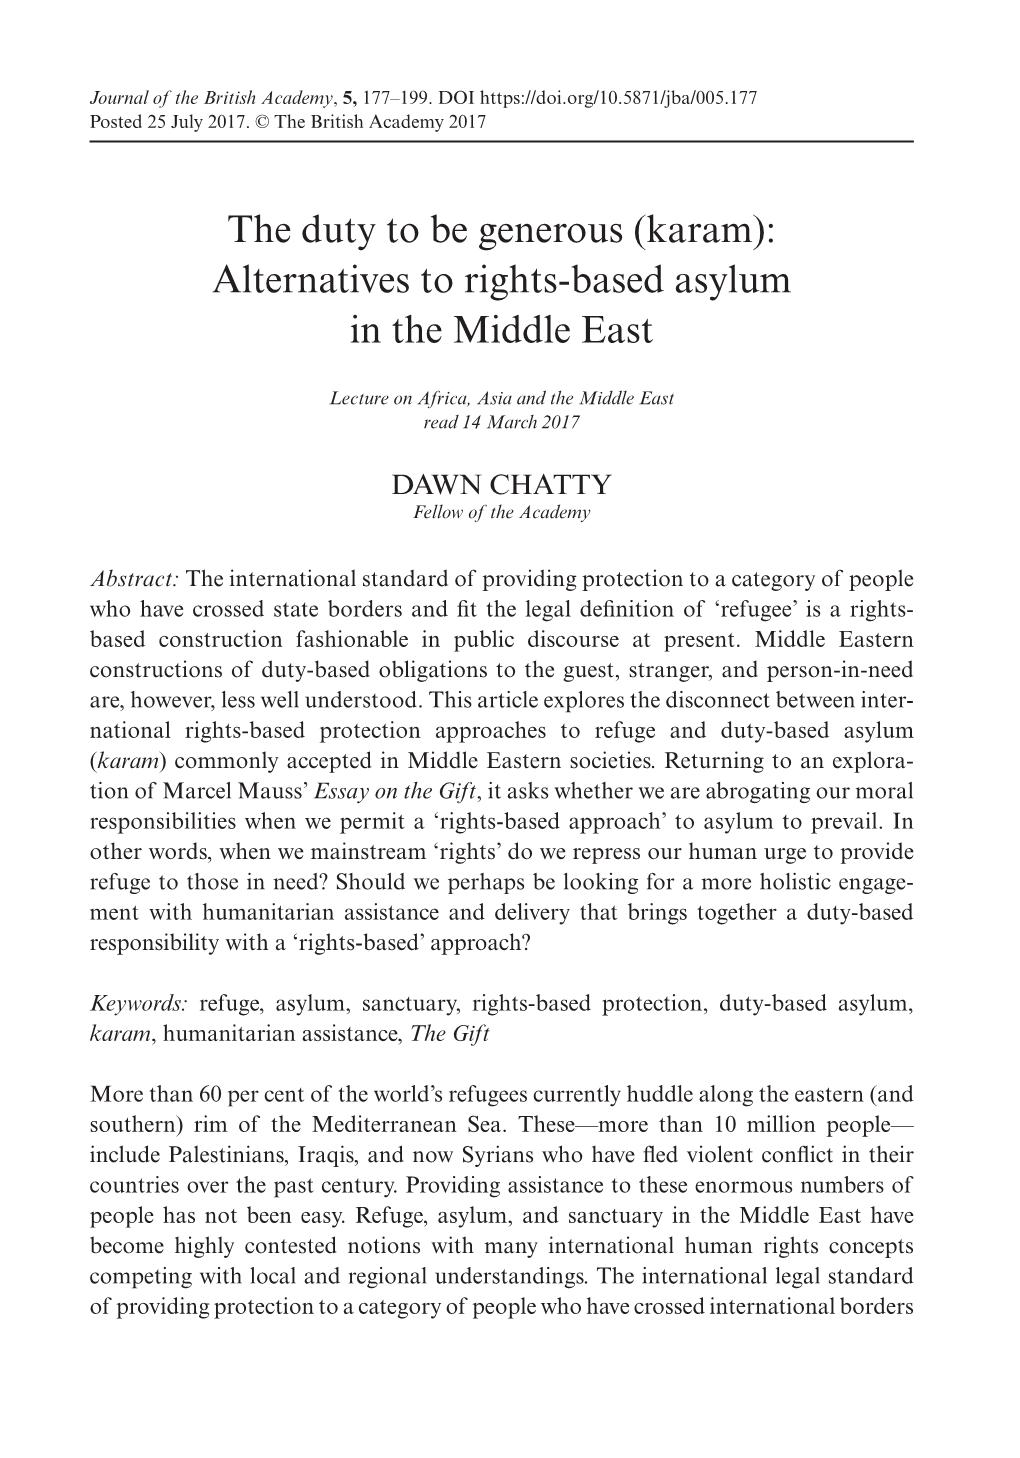 (Karam): Alternatives to Rights-Based Asylum in the Middle East